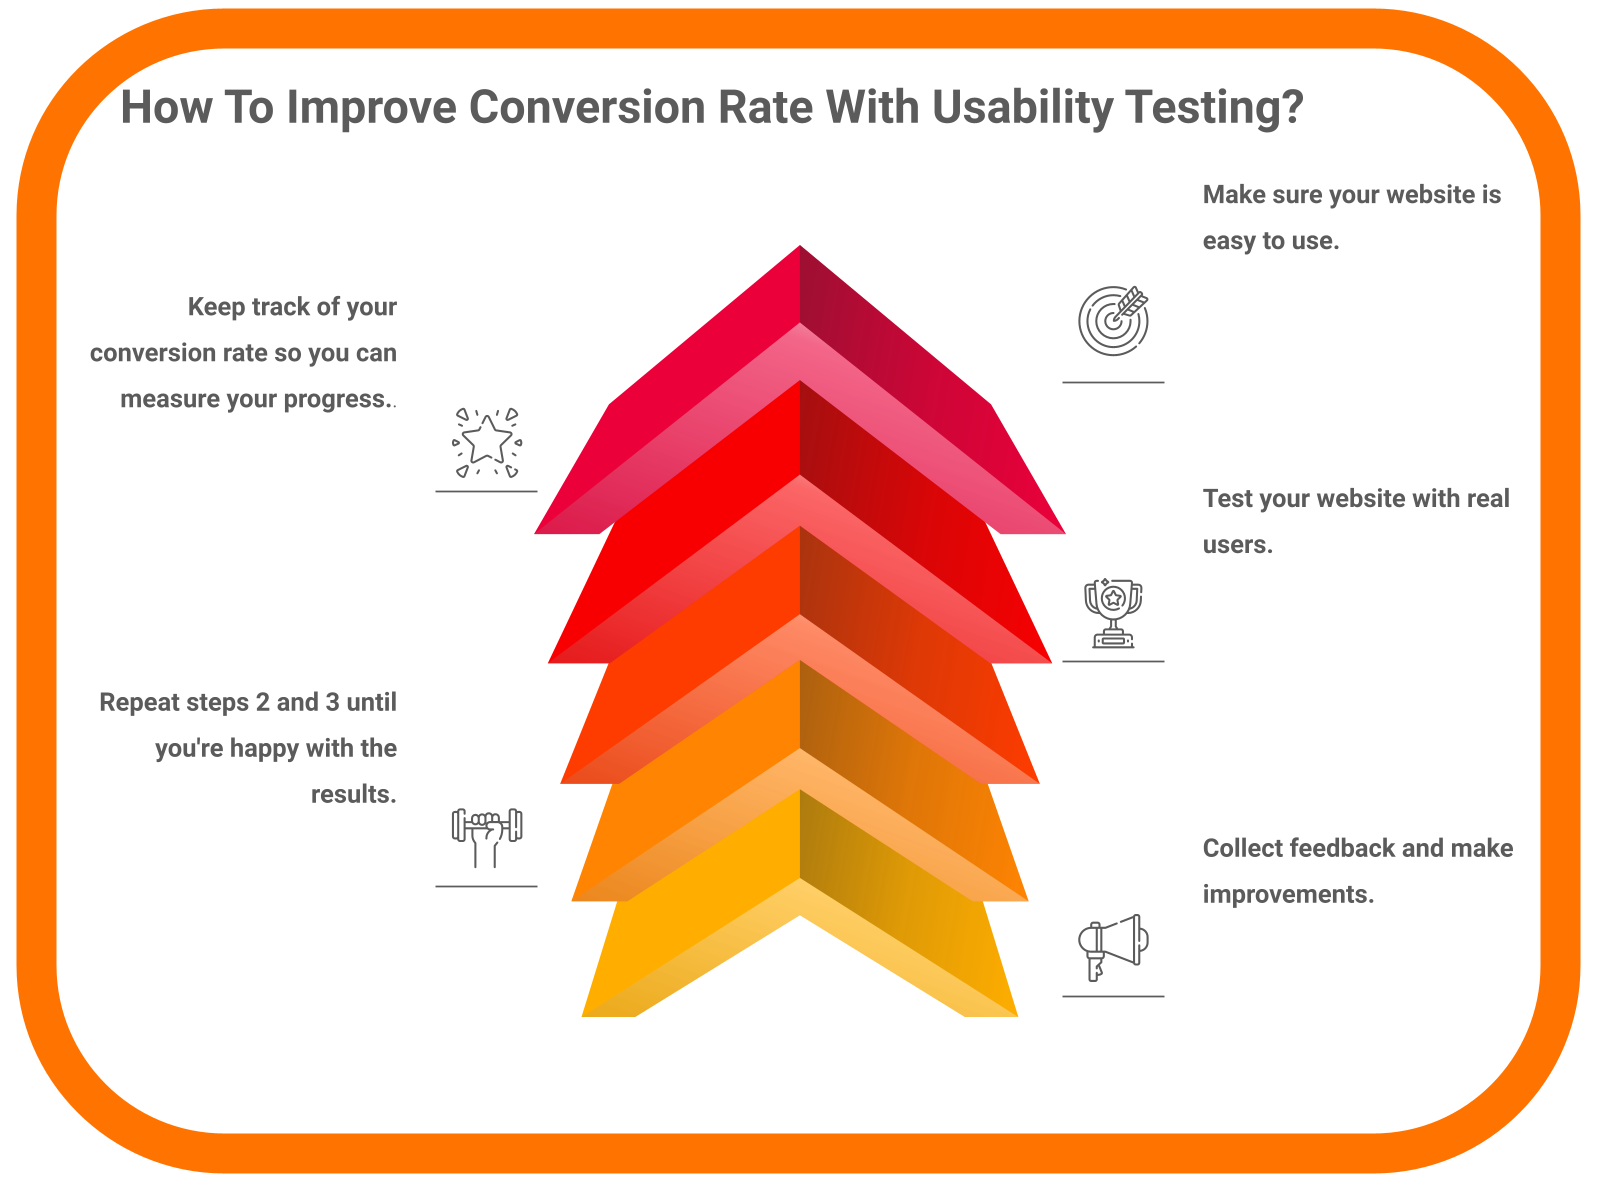 How To Improve Conversion Rate With Usability Testing?